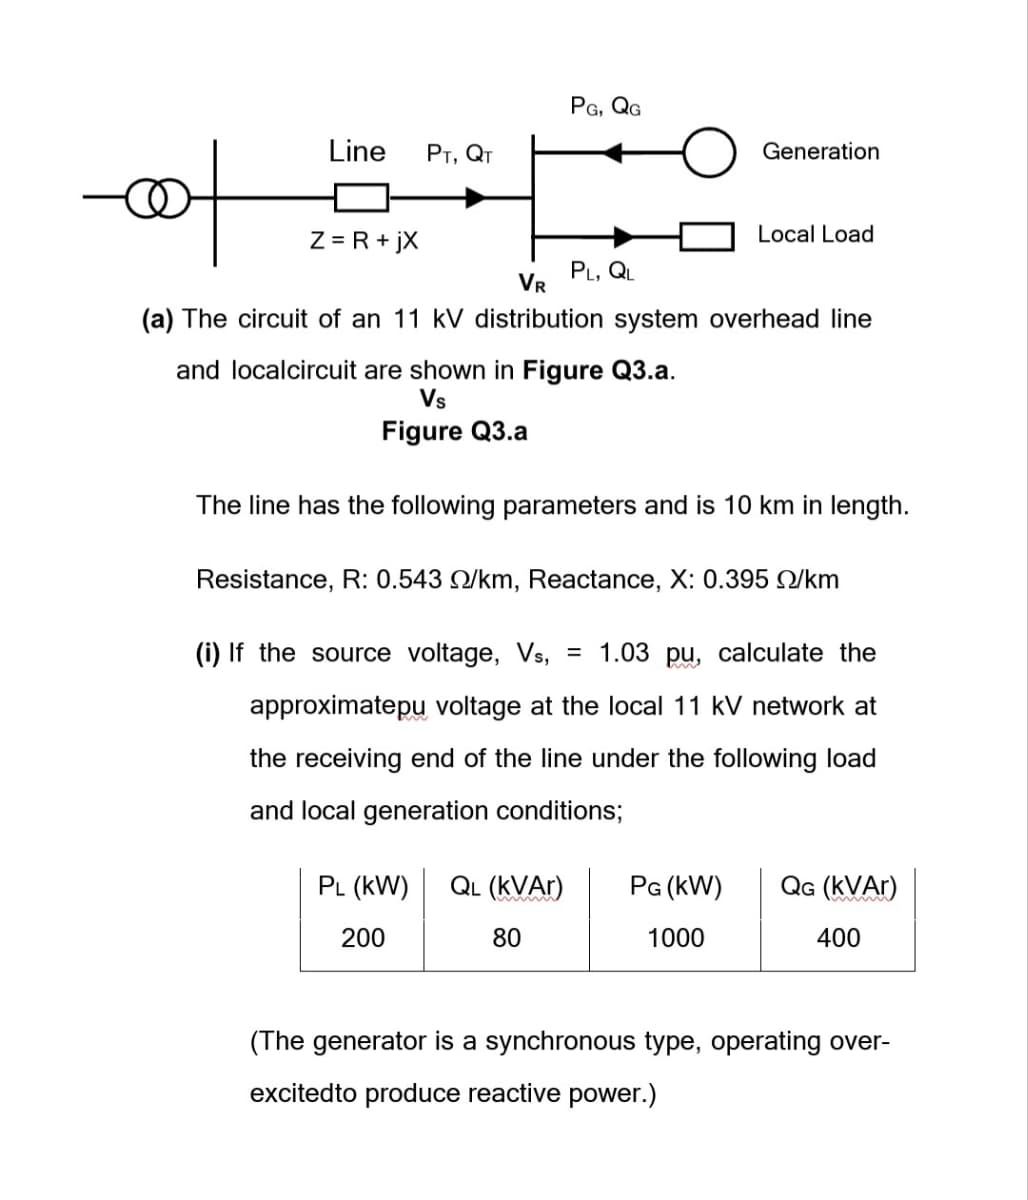 Line PT, QT
Z = R + jX
PG, QG
PL, QL
and localcircuit are shown in Figure Q3.a.
Vs
Figure Q3.a
VR
(a) The circuit of an 11 kV distribution system overhead line
Generation
PL (KW) QL (KVA)
200
80
Local Load
The line has the following parameters and is 10 km in length.
Resistance, R: 0.543 /km, Reactance, X: 0.395 2/km
(i) If the source voltage, Vs, = 1.03 pu, calculate the
approximatepu voltage at the local 11 kV network at
the receiving end of the line under the following load
and local generation conditions;
PG (KW)
1000
QG (KVAR)
400
(The generator is a synchronous type, operating over-
excited to produce reactive power.)